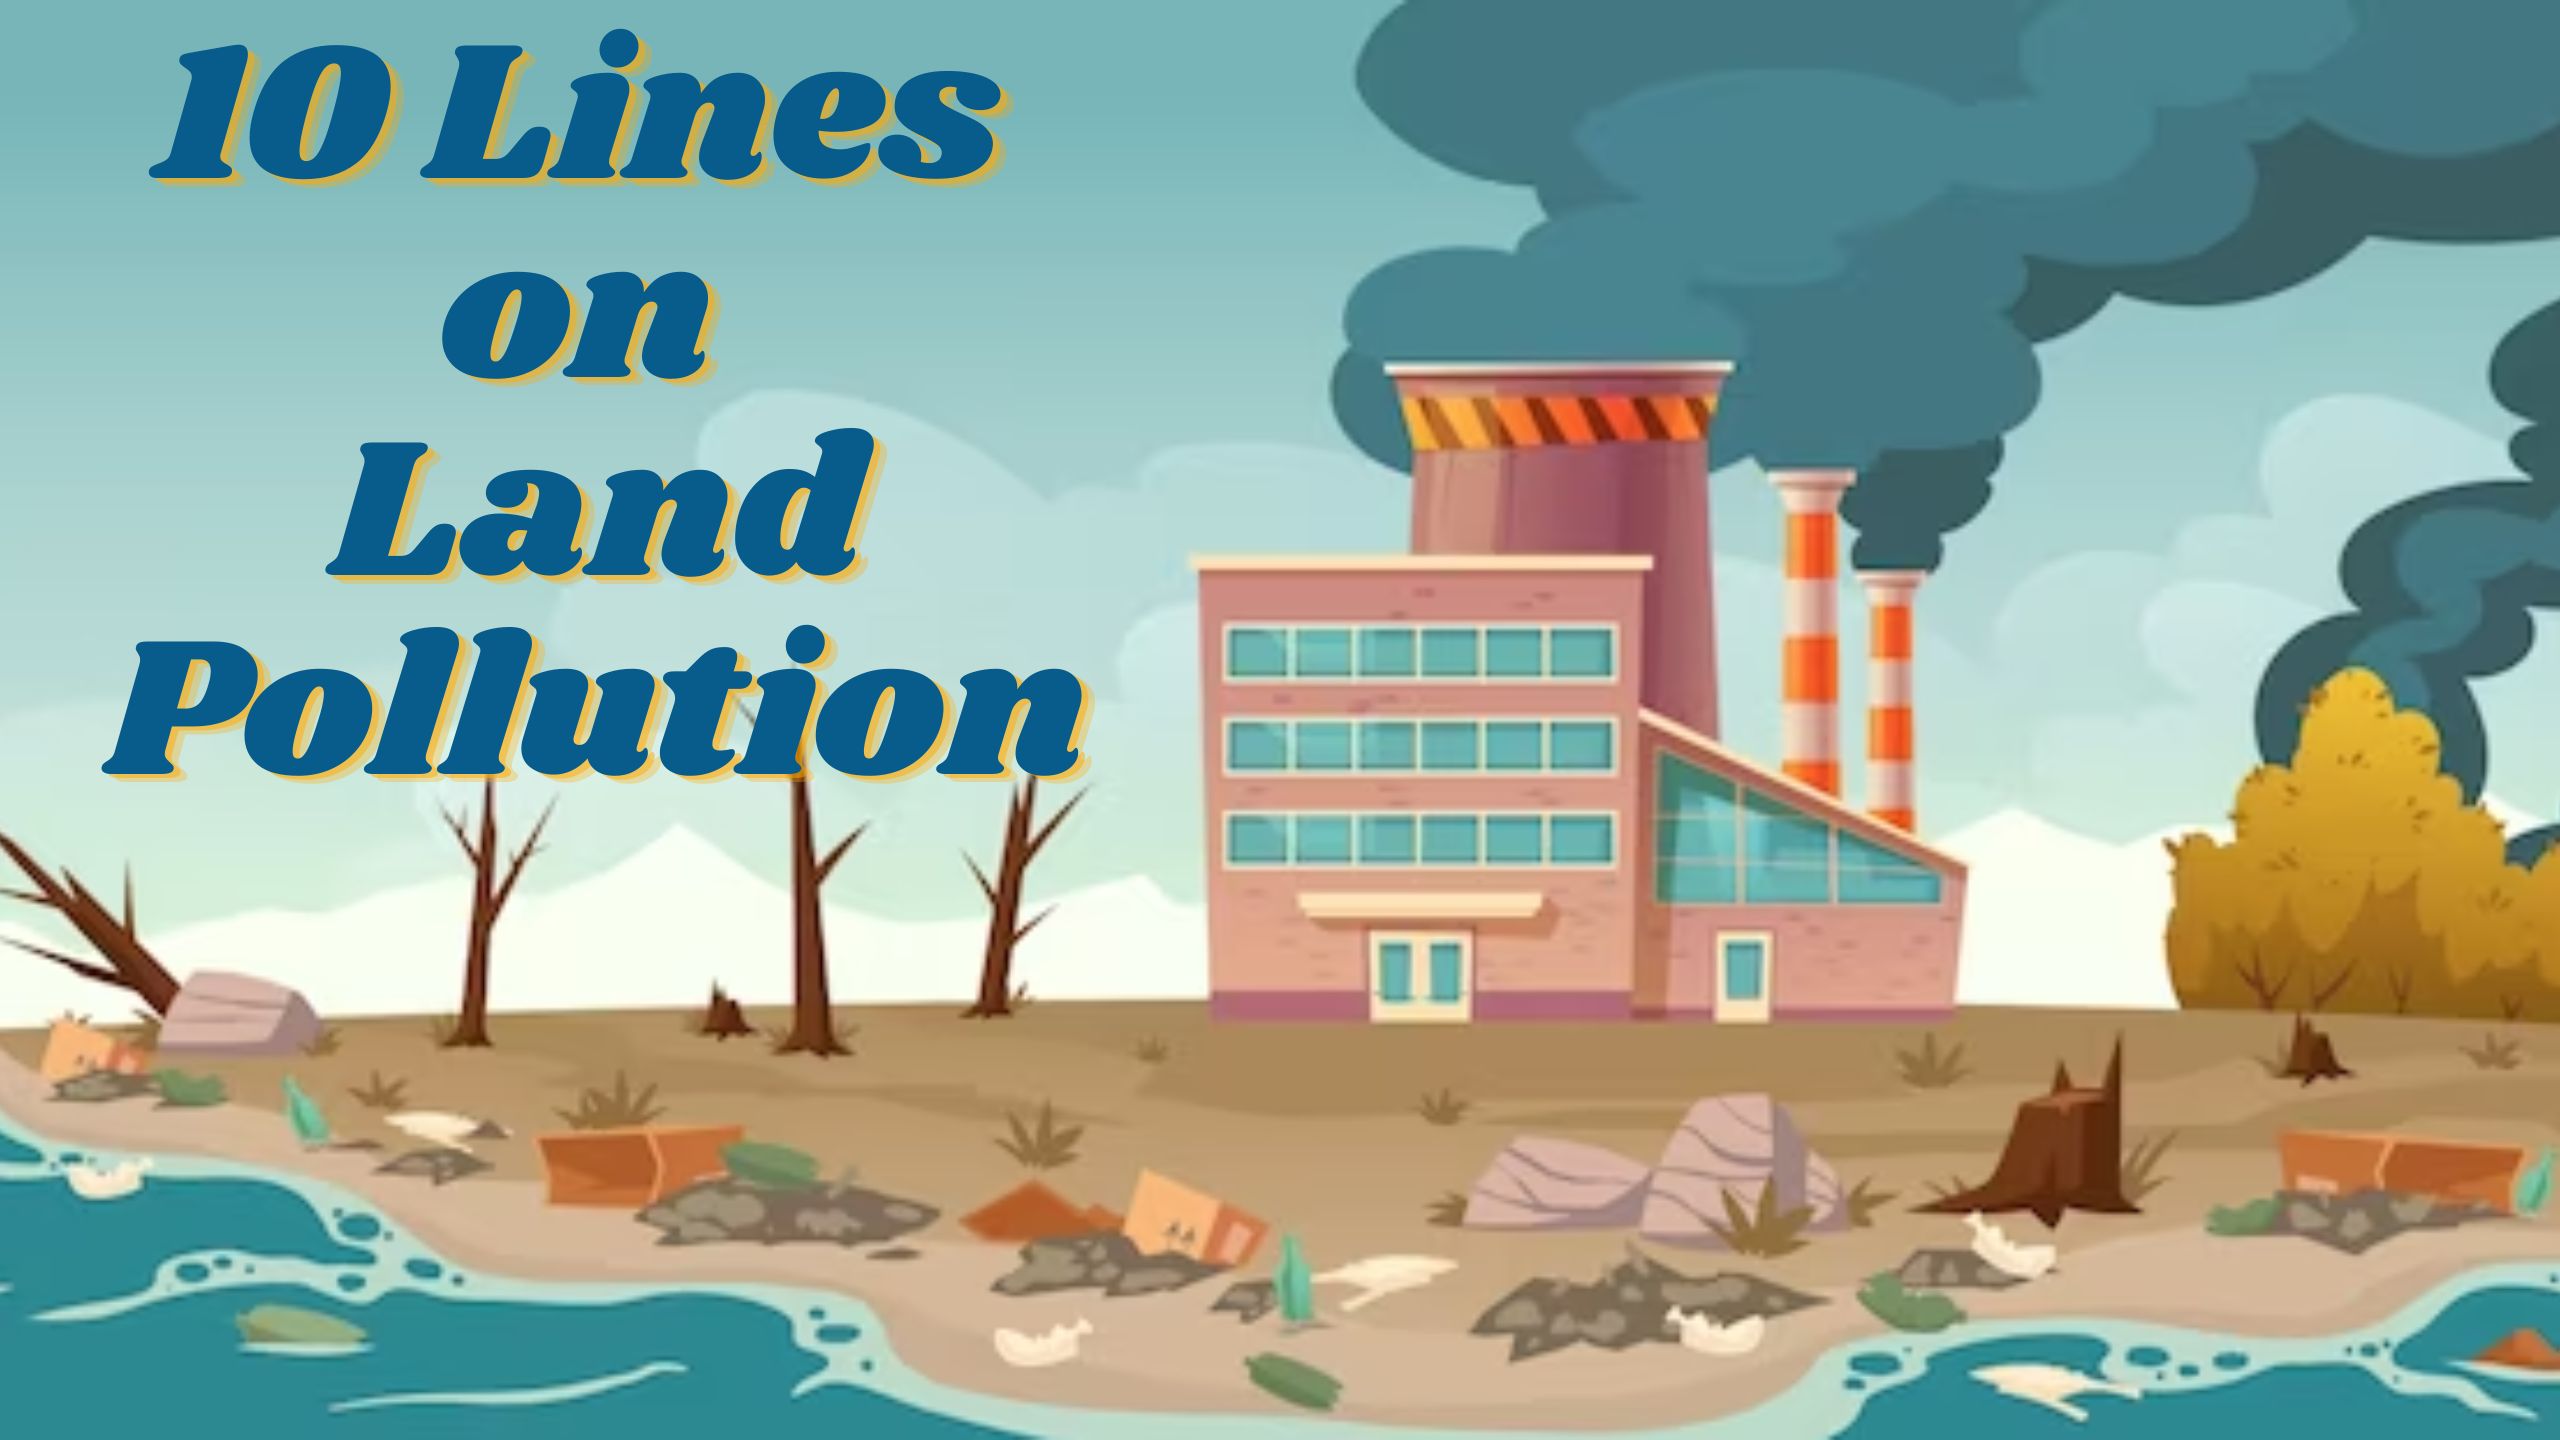 Pollution drawing | Pollution drawing easy | Type of pollution drawing |  pollution poster drawing - YouTube